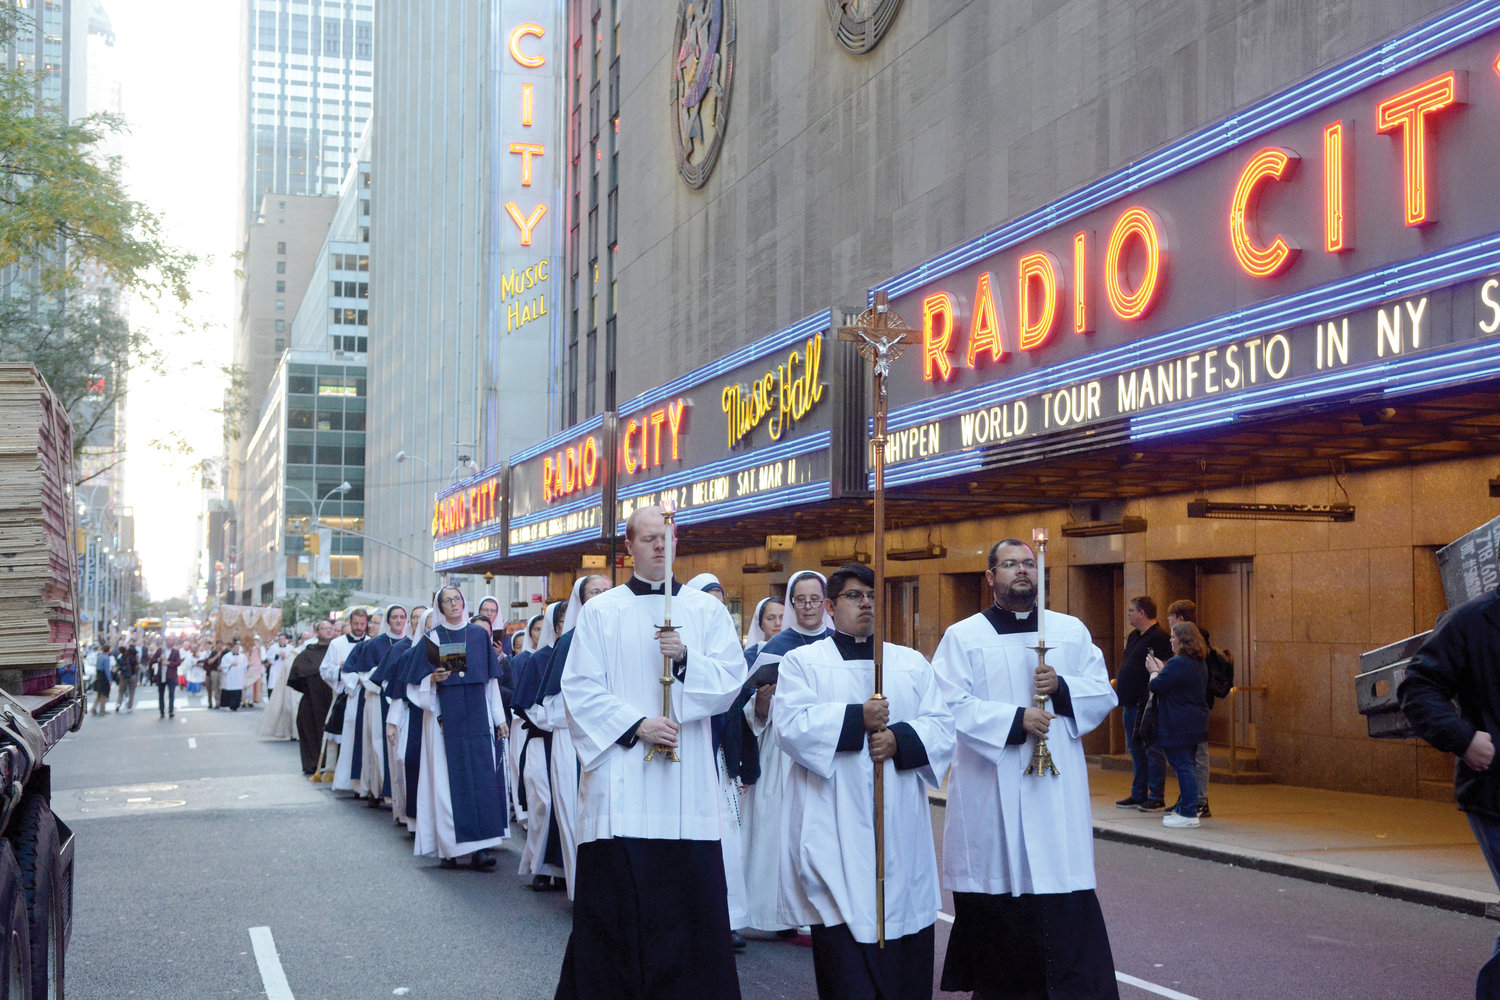 A Eucharistic procession in New York City on the afternoon of Oct. 11 walks past the iconic marquee of Radio City Music Hall en route to St. Patrick’s Cathedral, where Cardinal Dolan led Exposition of the Blessed Sacrament and Benediction.